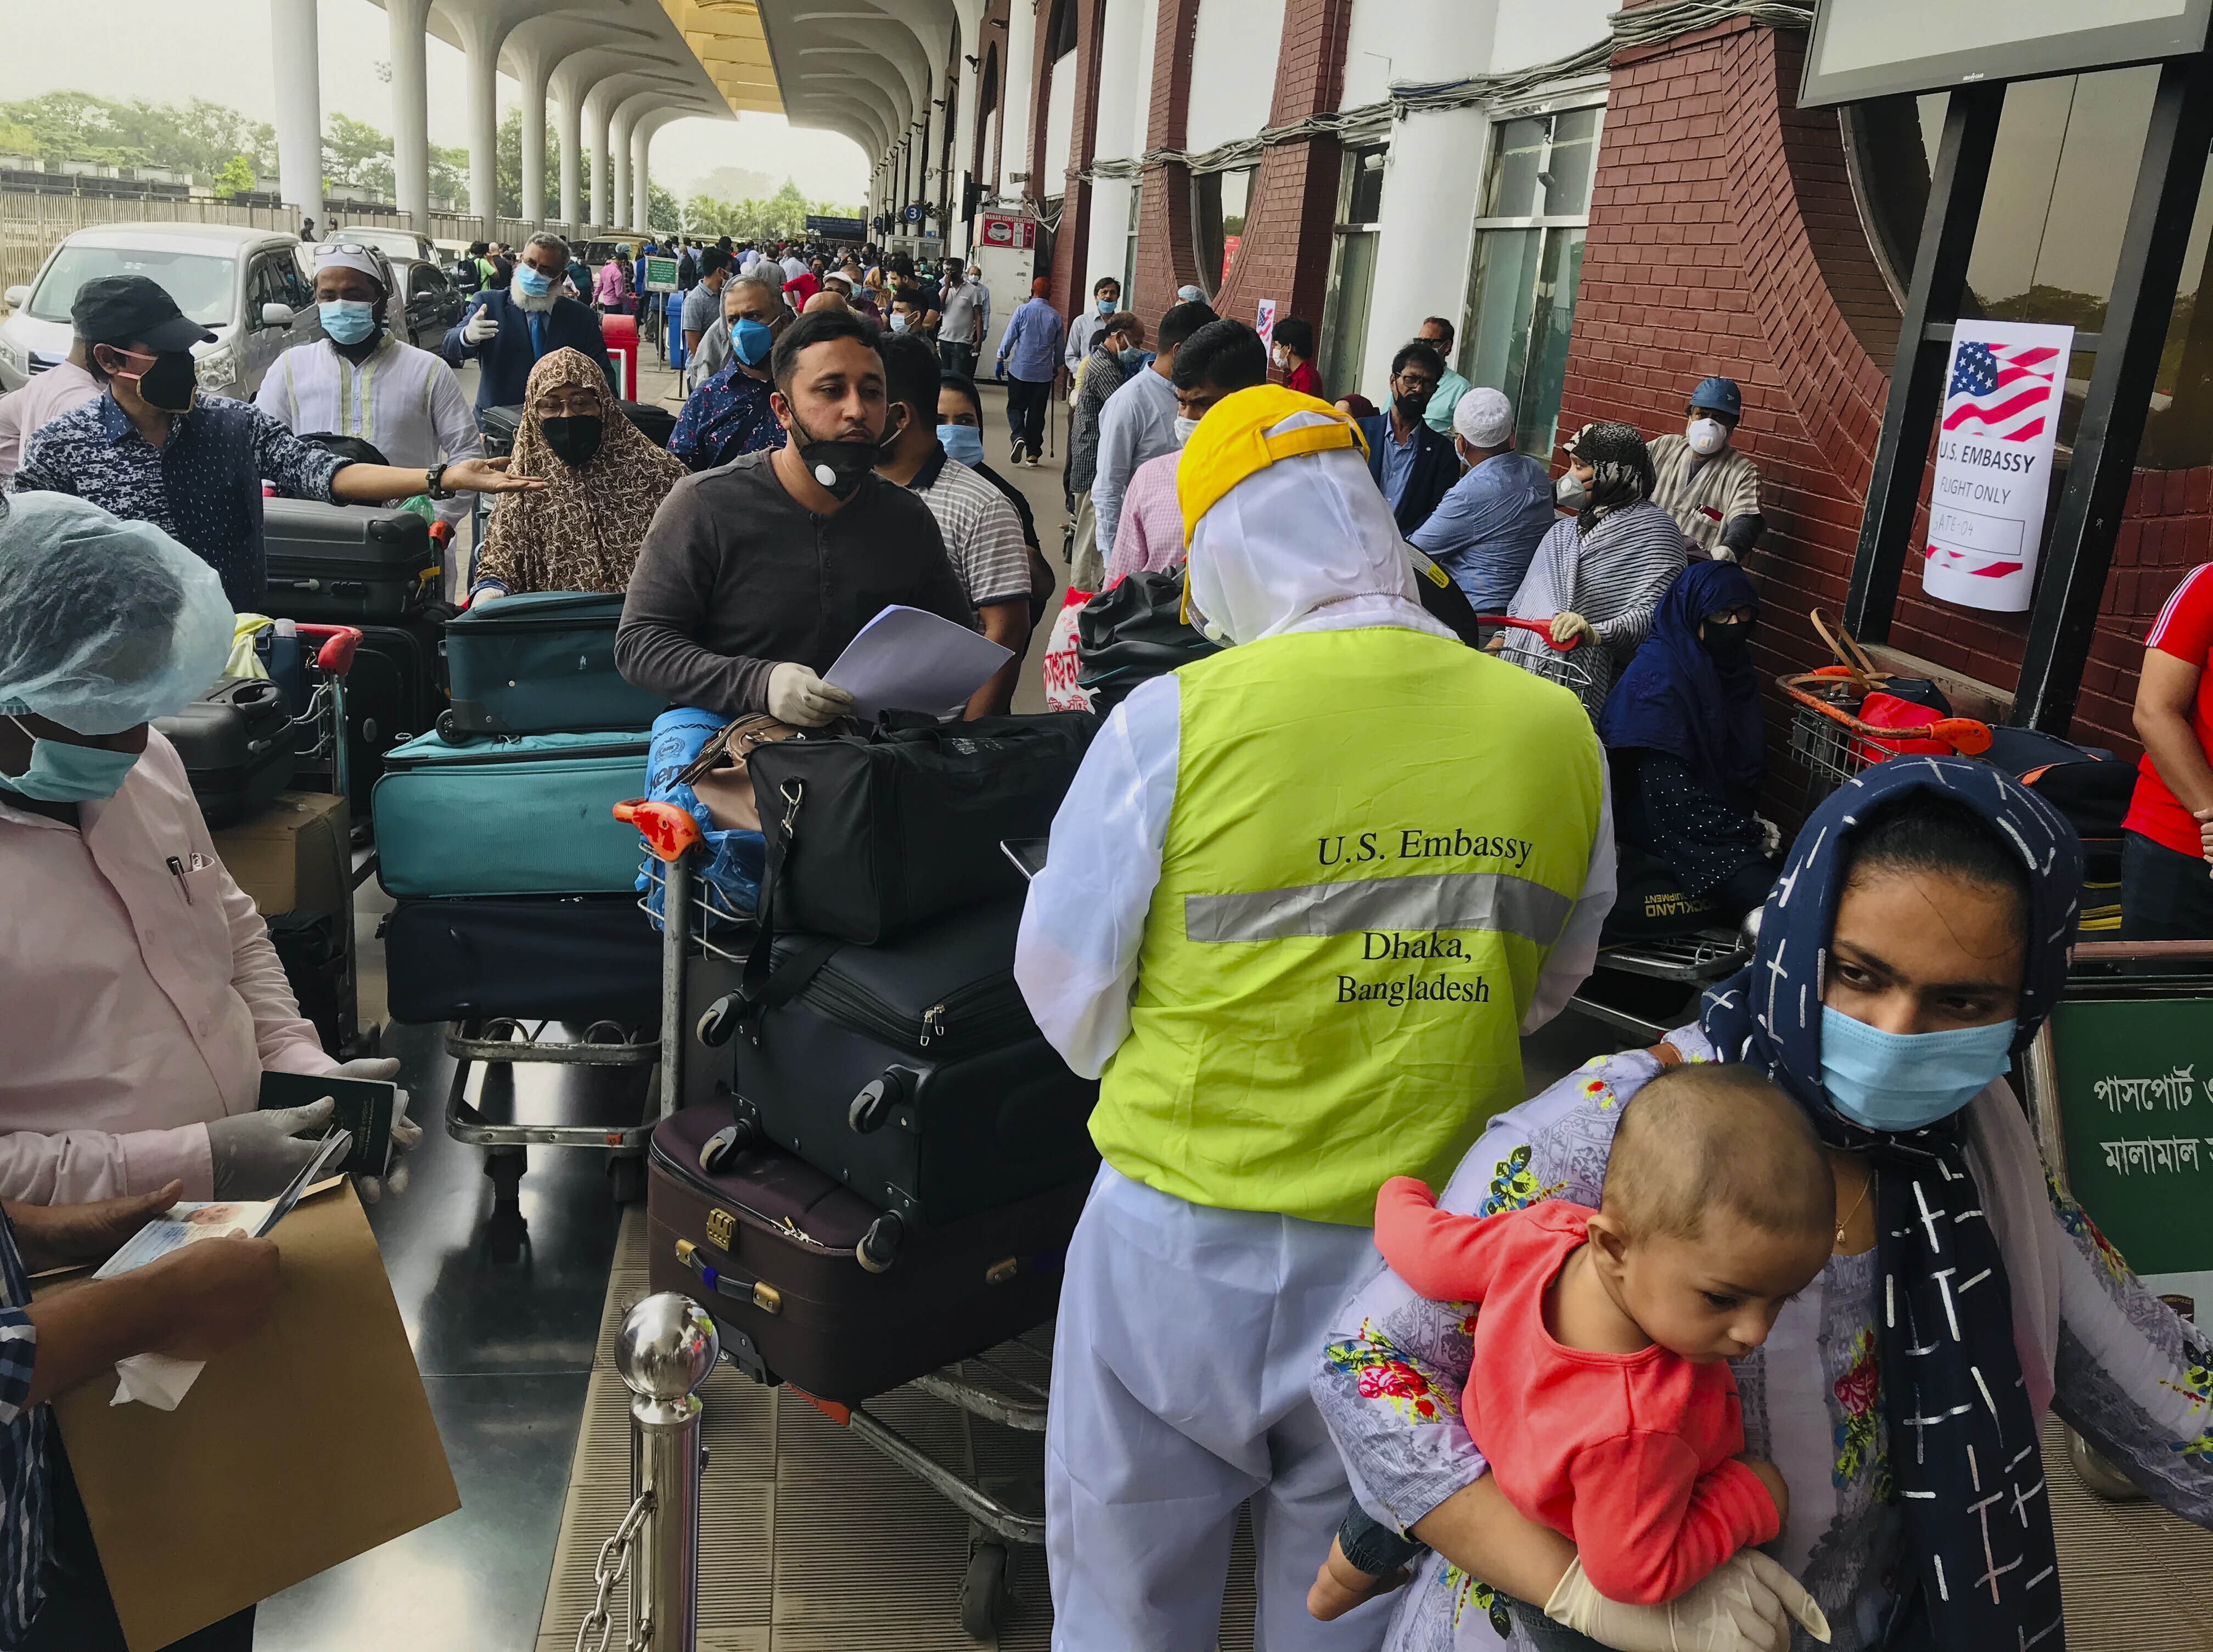 British and American nationals who were stranded in Bangladesh arrive to board repatriation flights at the Hazrat Shahjalal International Airport as the country continues to be in lock down to prevent the spread of the new coronavirus in Dhaka, Bangladesh, Tuesday, April 21, 2020. Bangladesh, a nation of 160 million people, is struggling to keep its number of infections in check as community transmission of the virus has invaded the common people across the country. (AP Photo/Al-emrun Garjon)